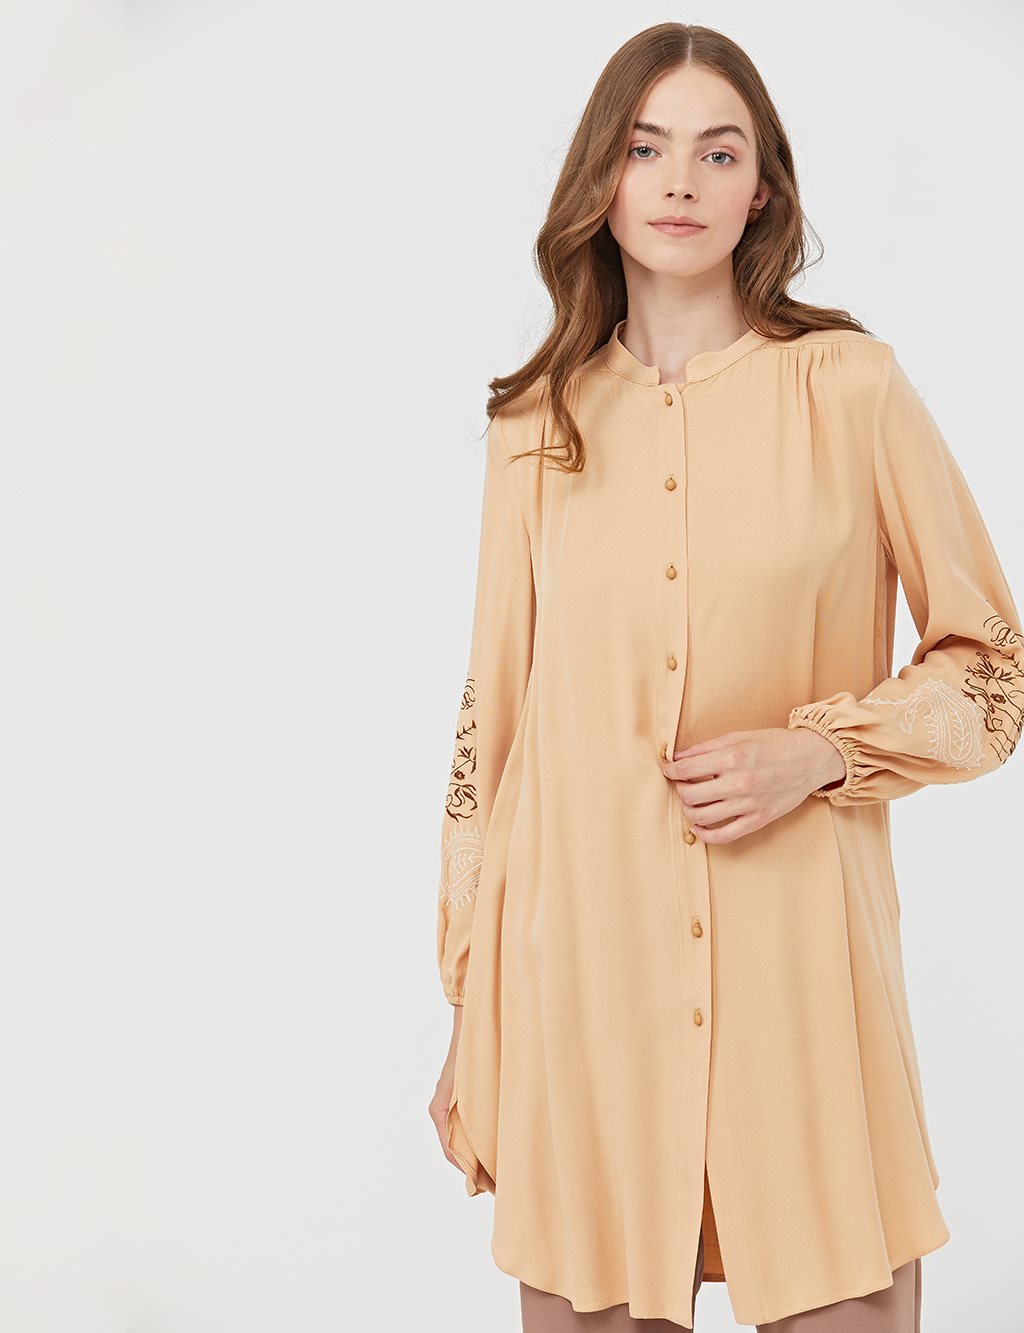 Embroidered Sleeves Judge Collar Tunic Beige